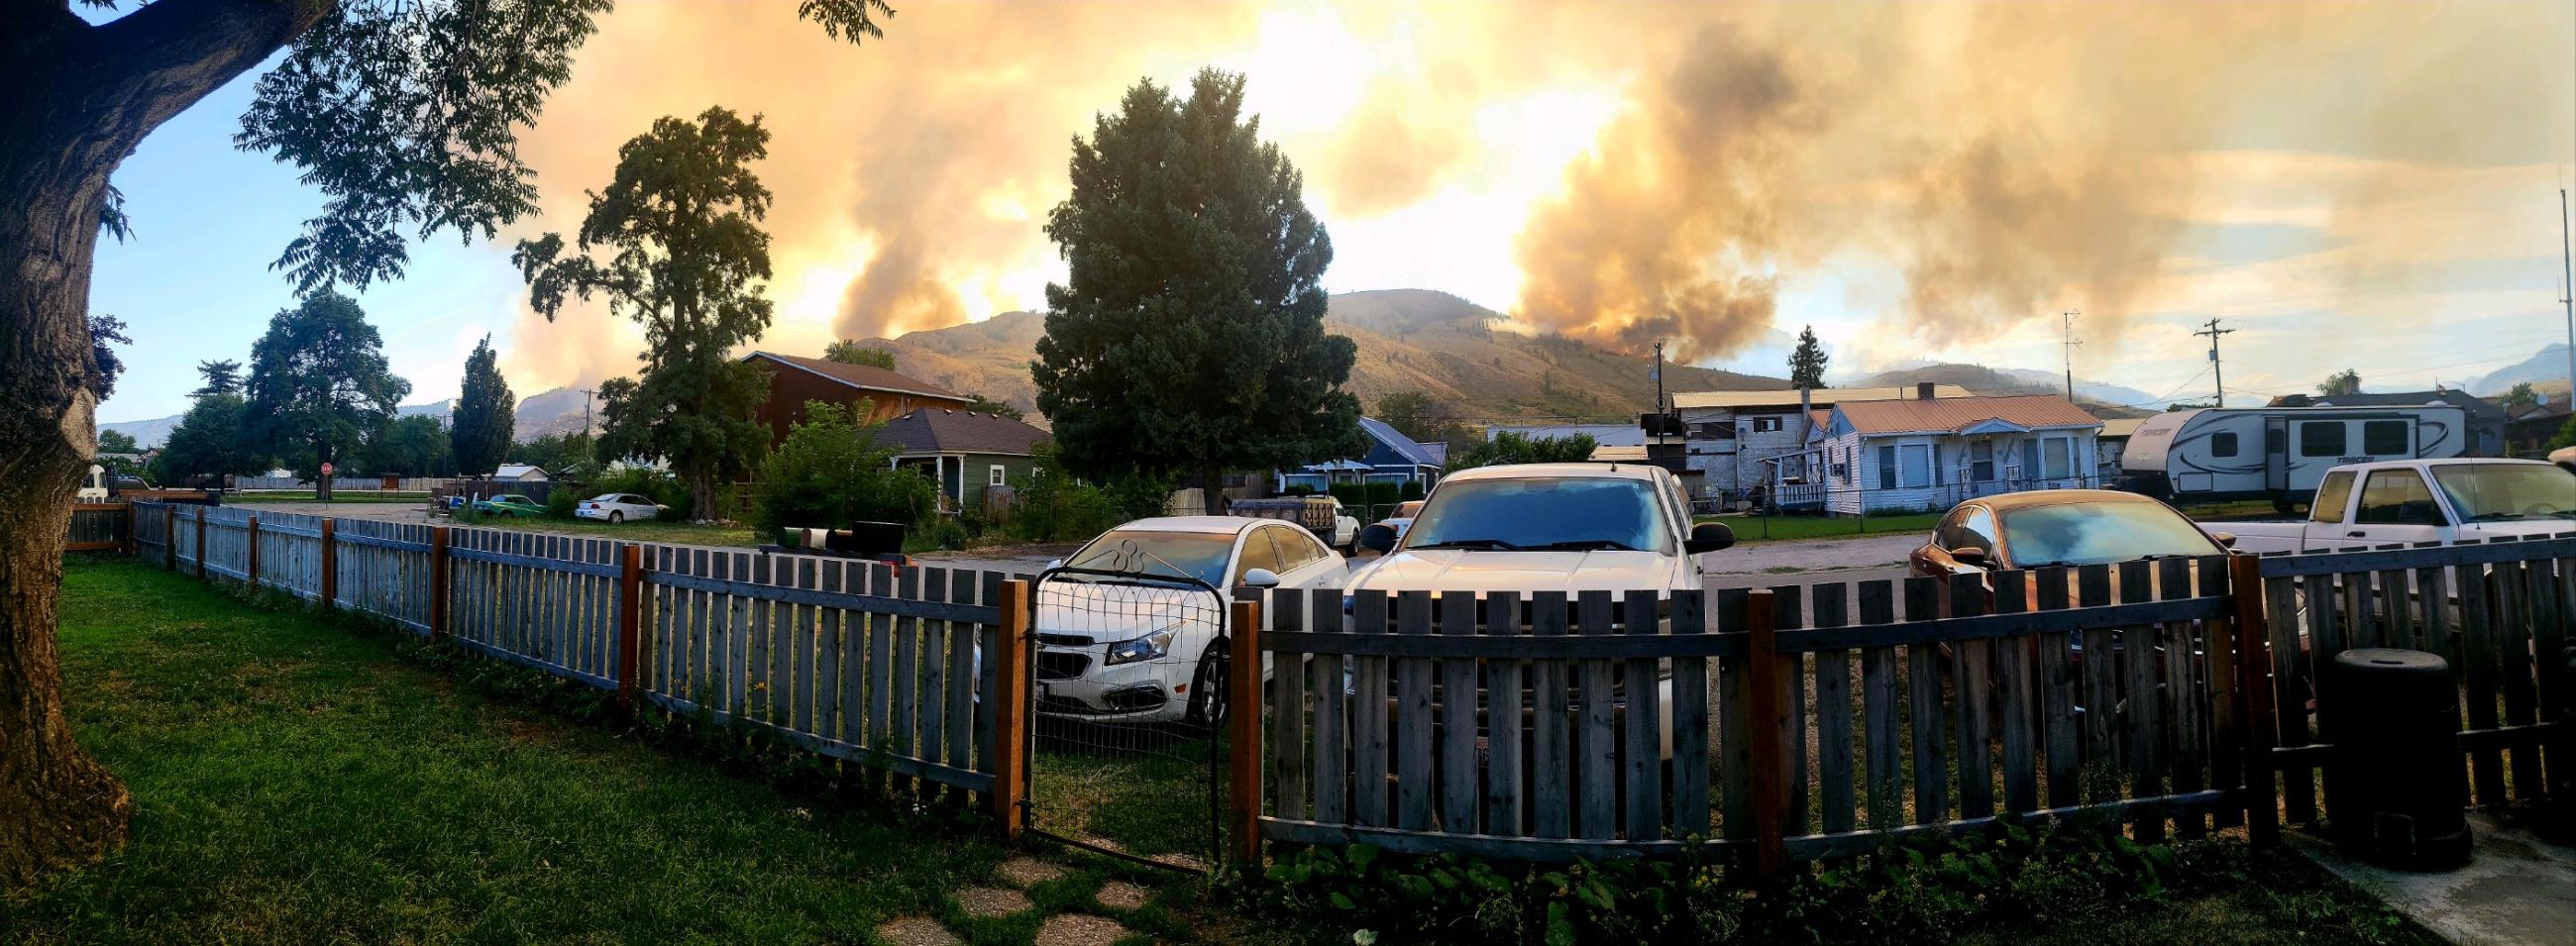 View from someone's yard of neighborhood in foreground with burning hills in background